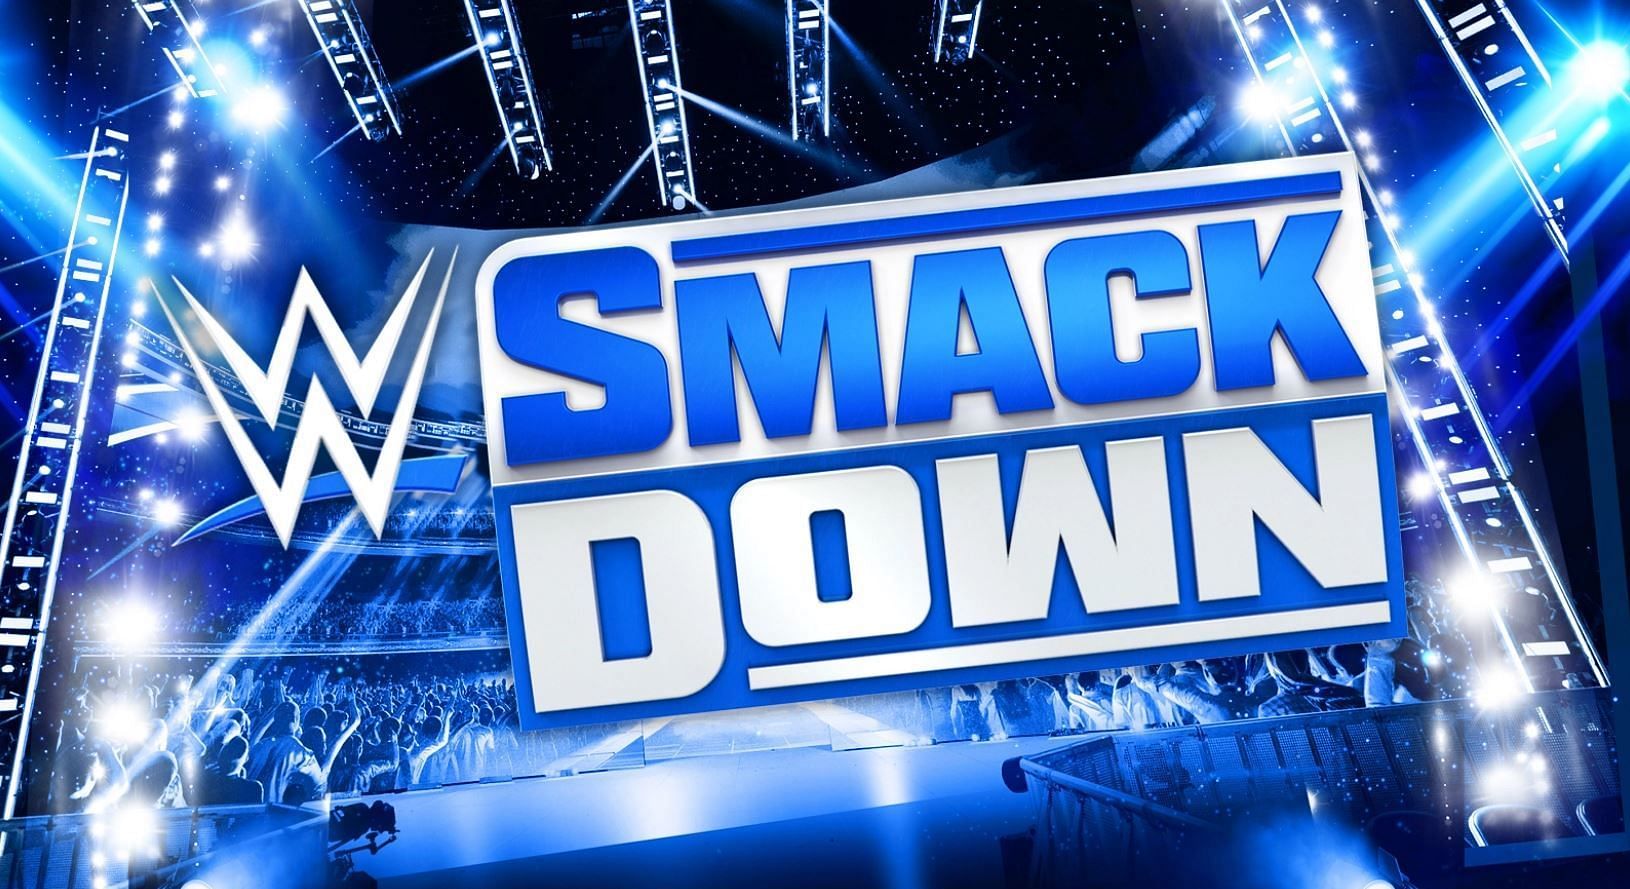 This SmackDown star lost another match on TV